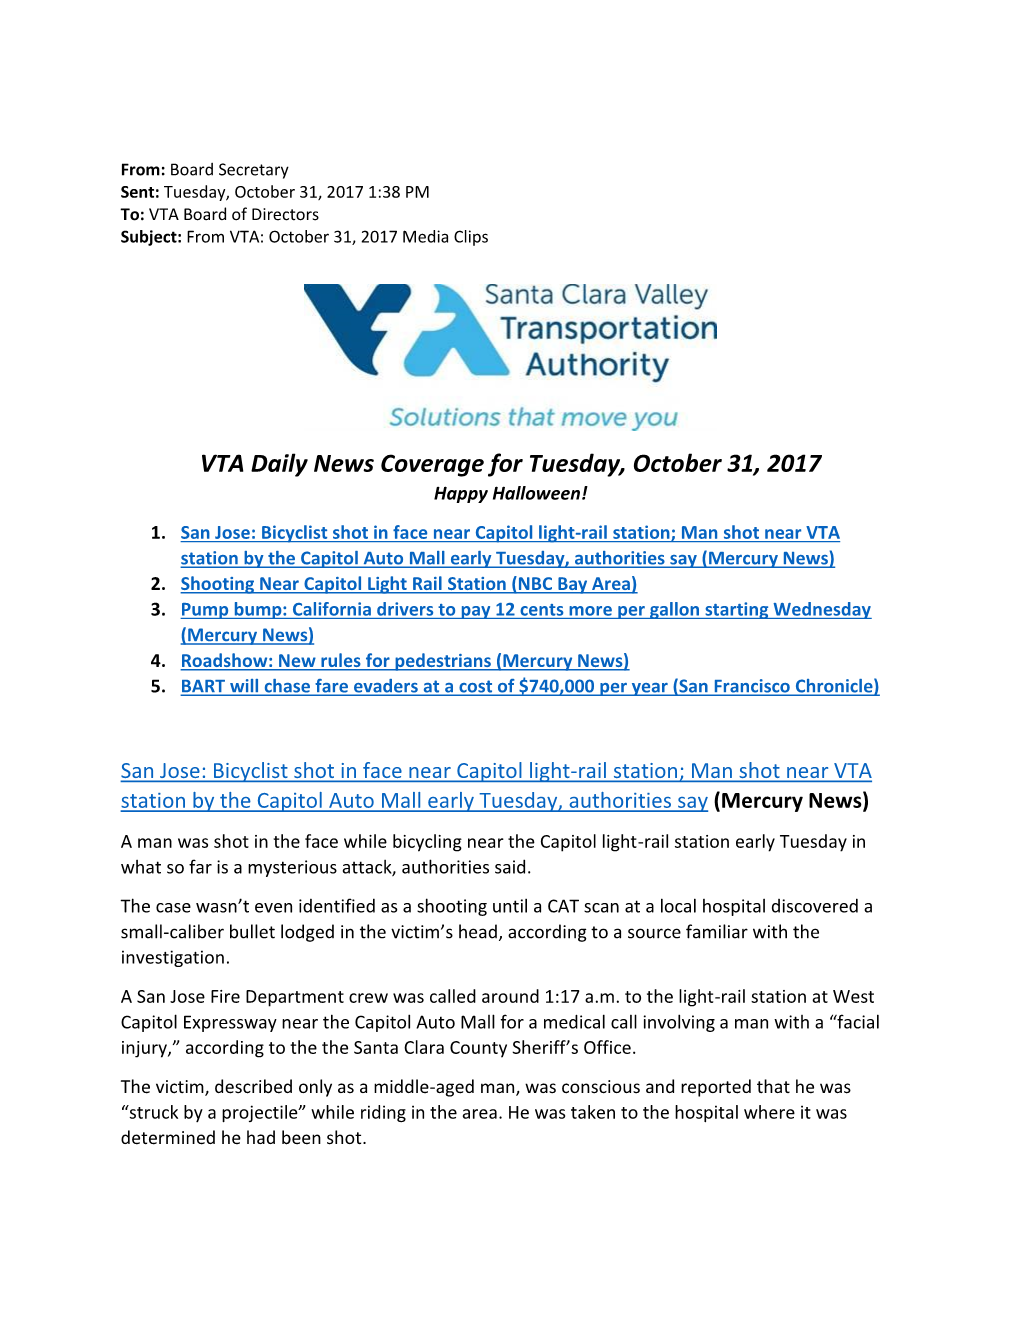 VTA Daily News Coverage for Tuesday, October 31, 2017 Happy Halloween! 1